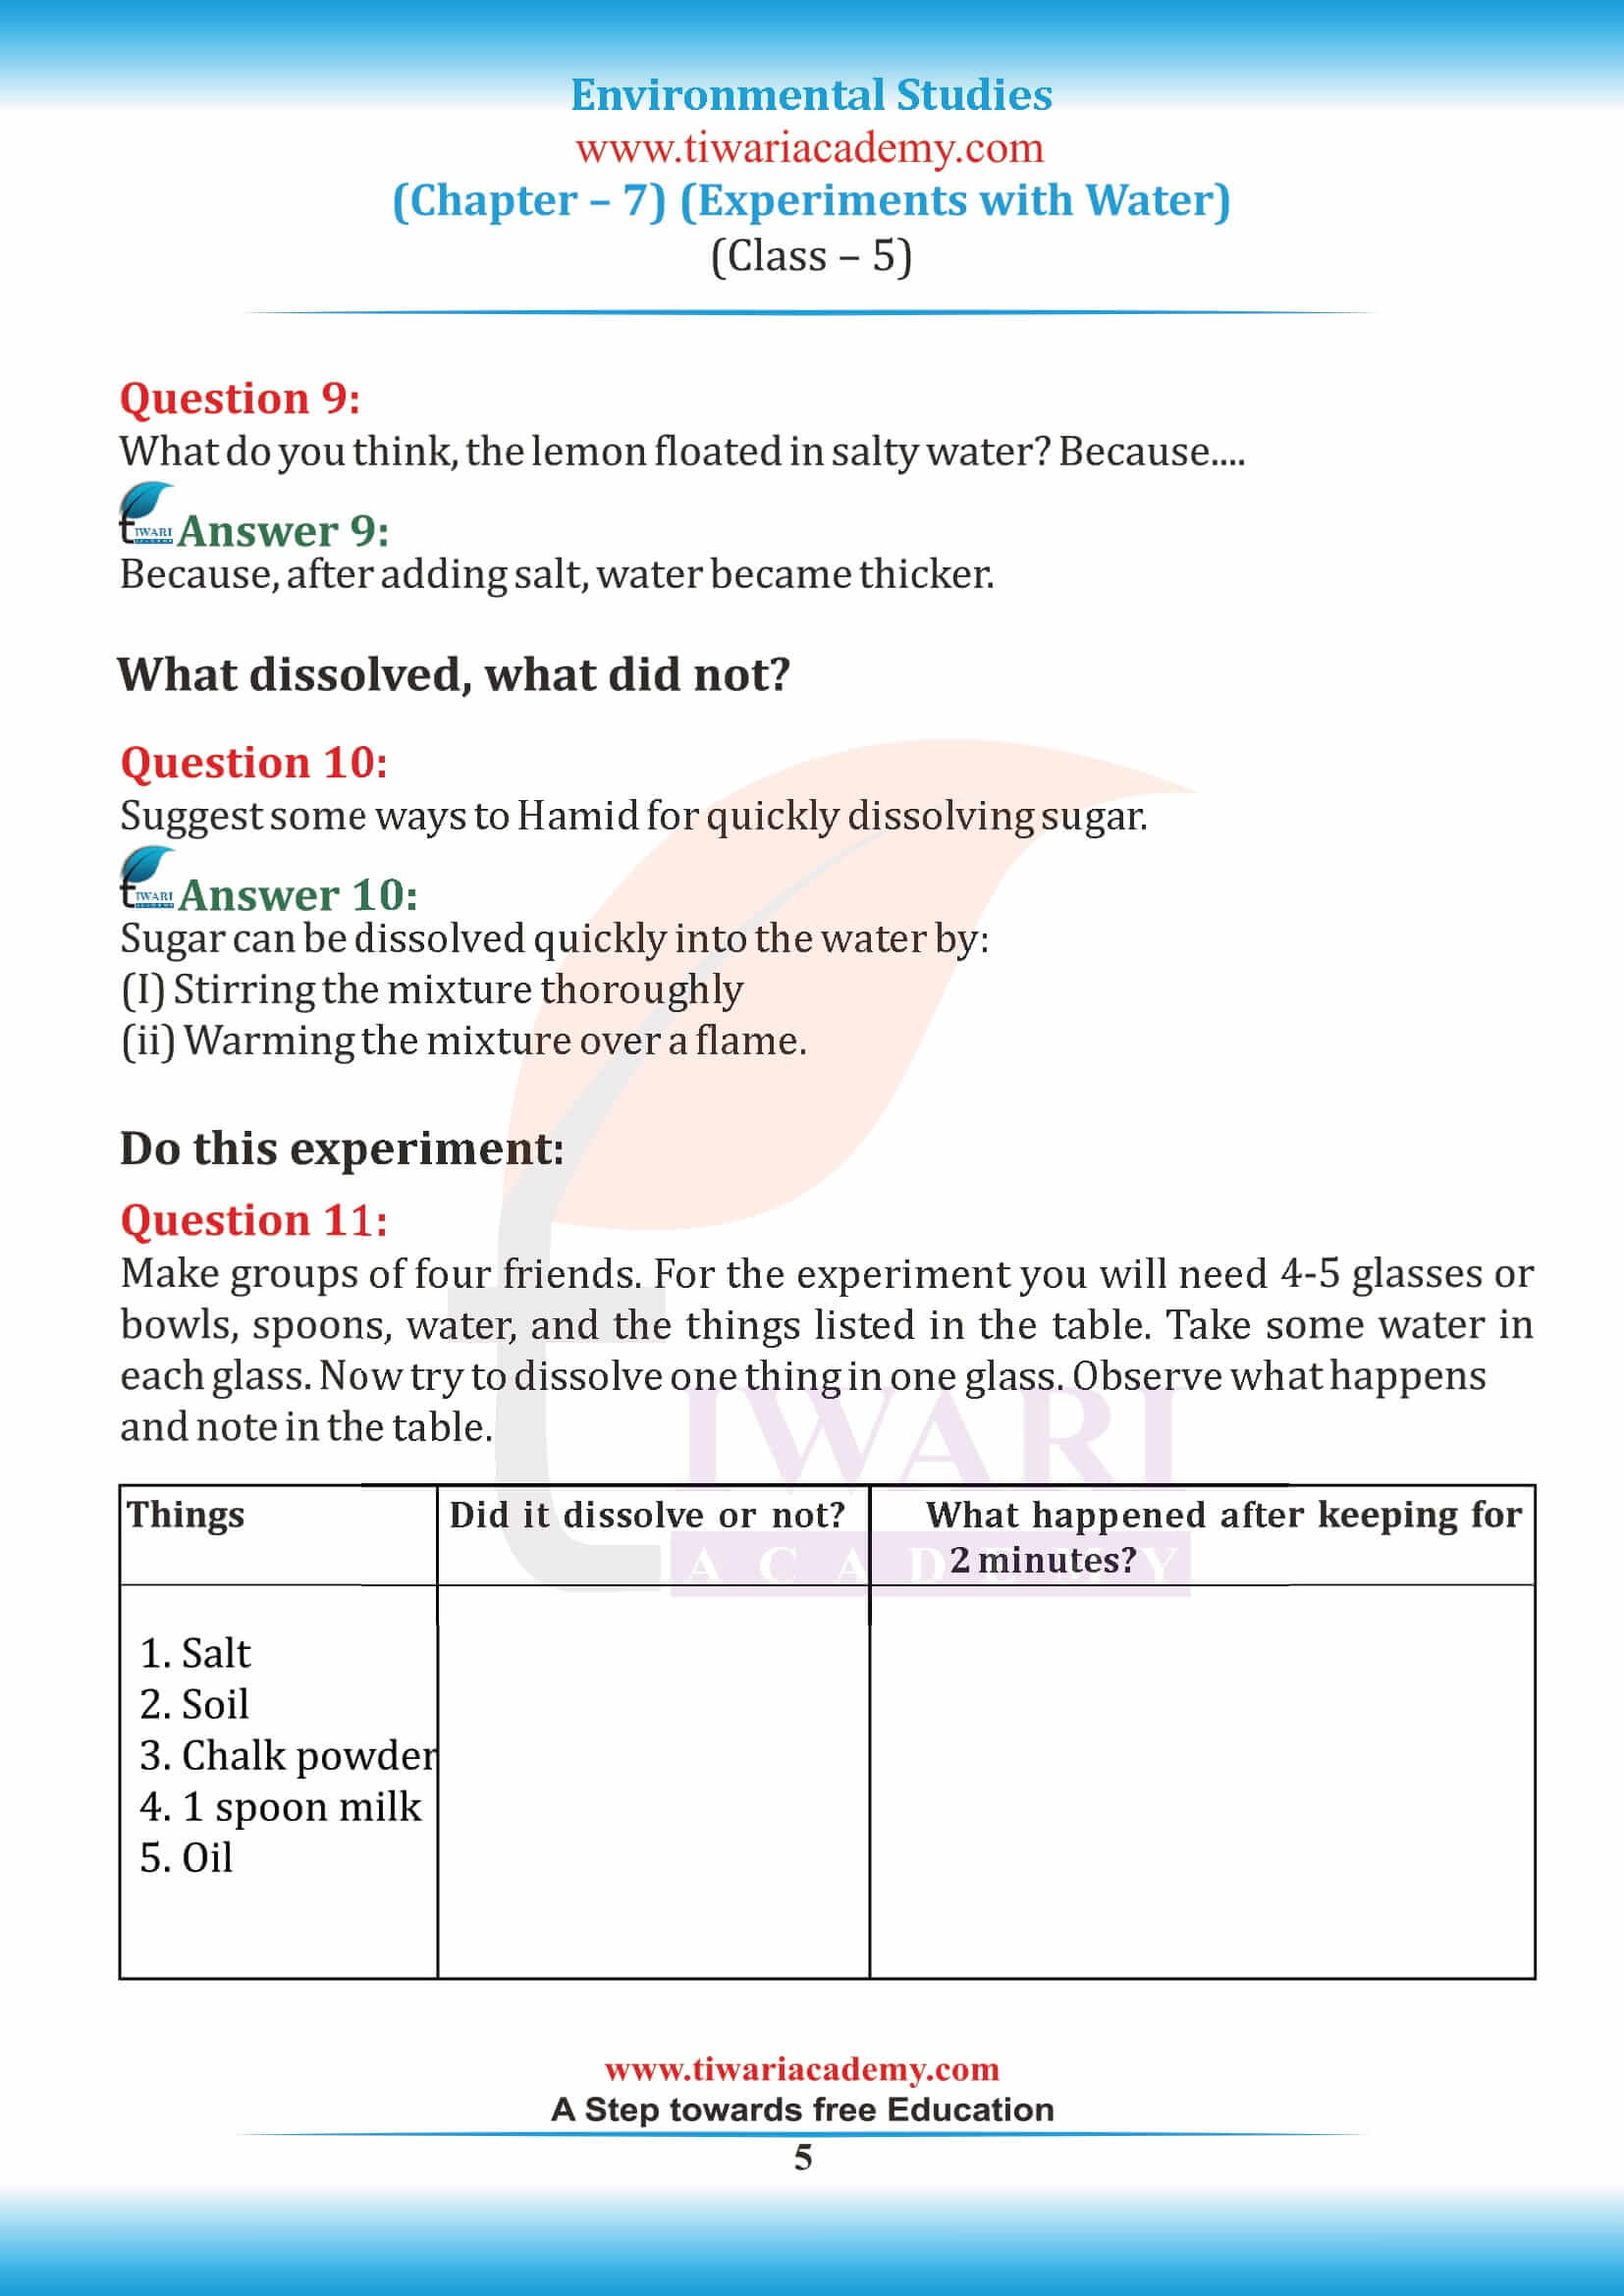 NCERT Solutions for Class 5 EVS Chapter 7 free download